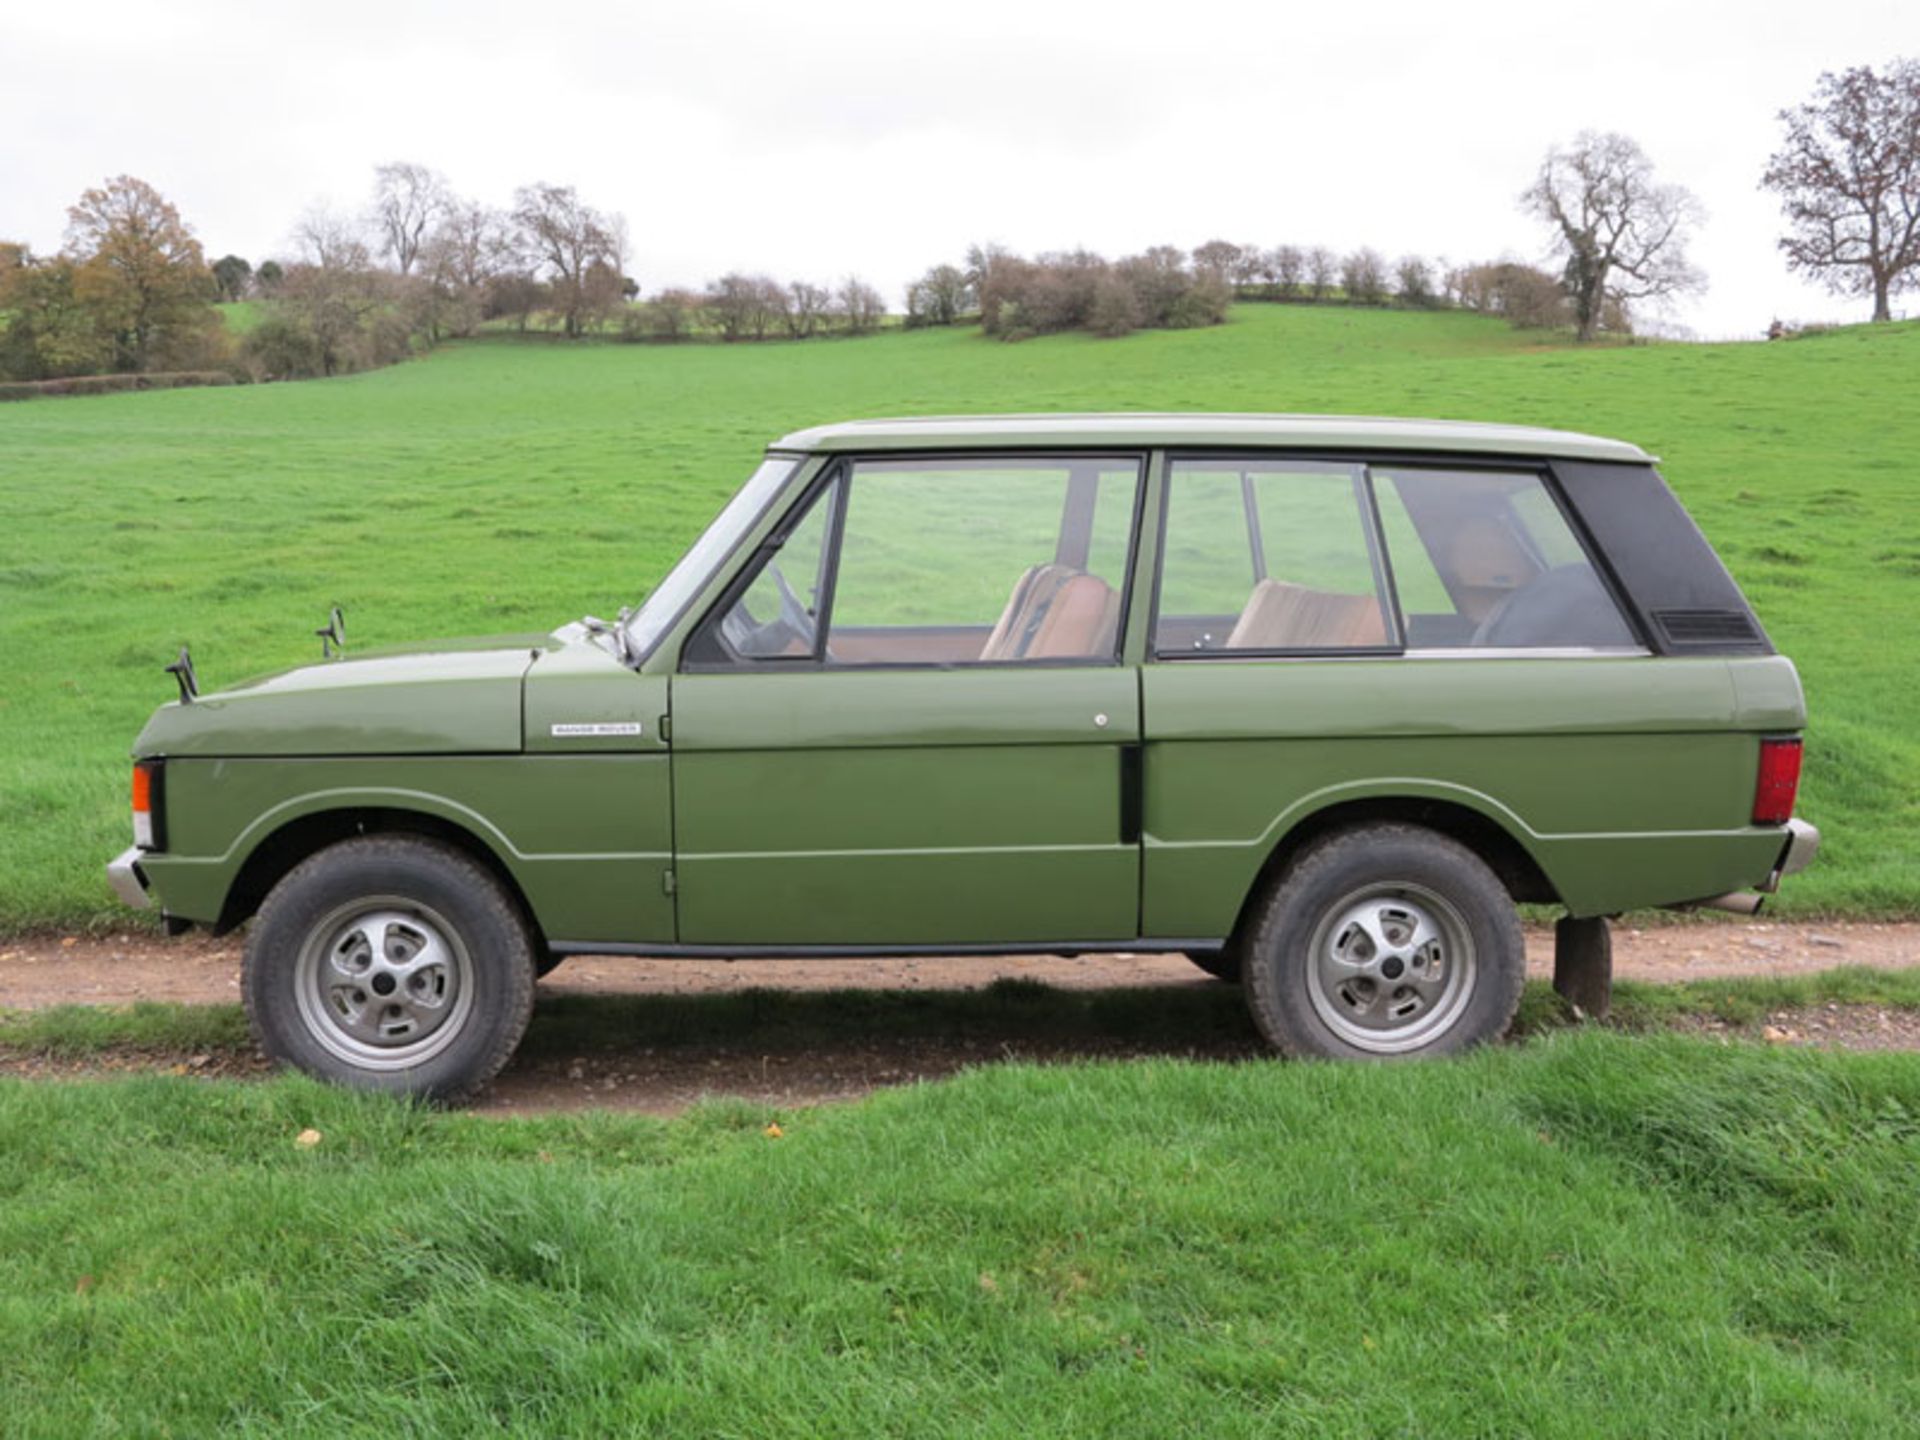 - Rare and desirable 'Suffix A' Range Rover

- 1 of 2,844 Home Market RHD cars built during the 1971 - Image 2 of 16